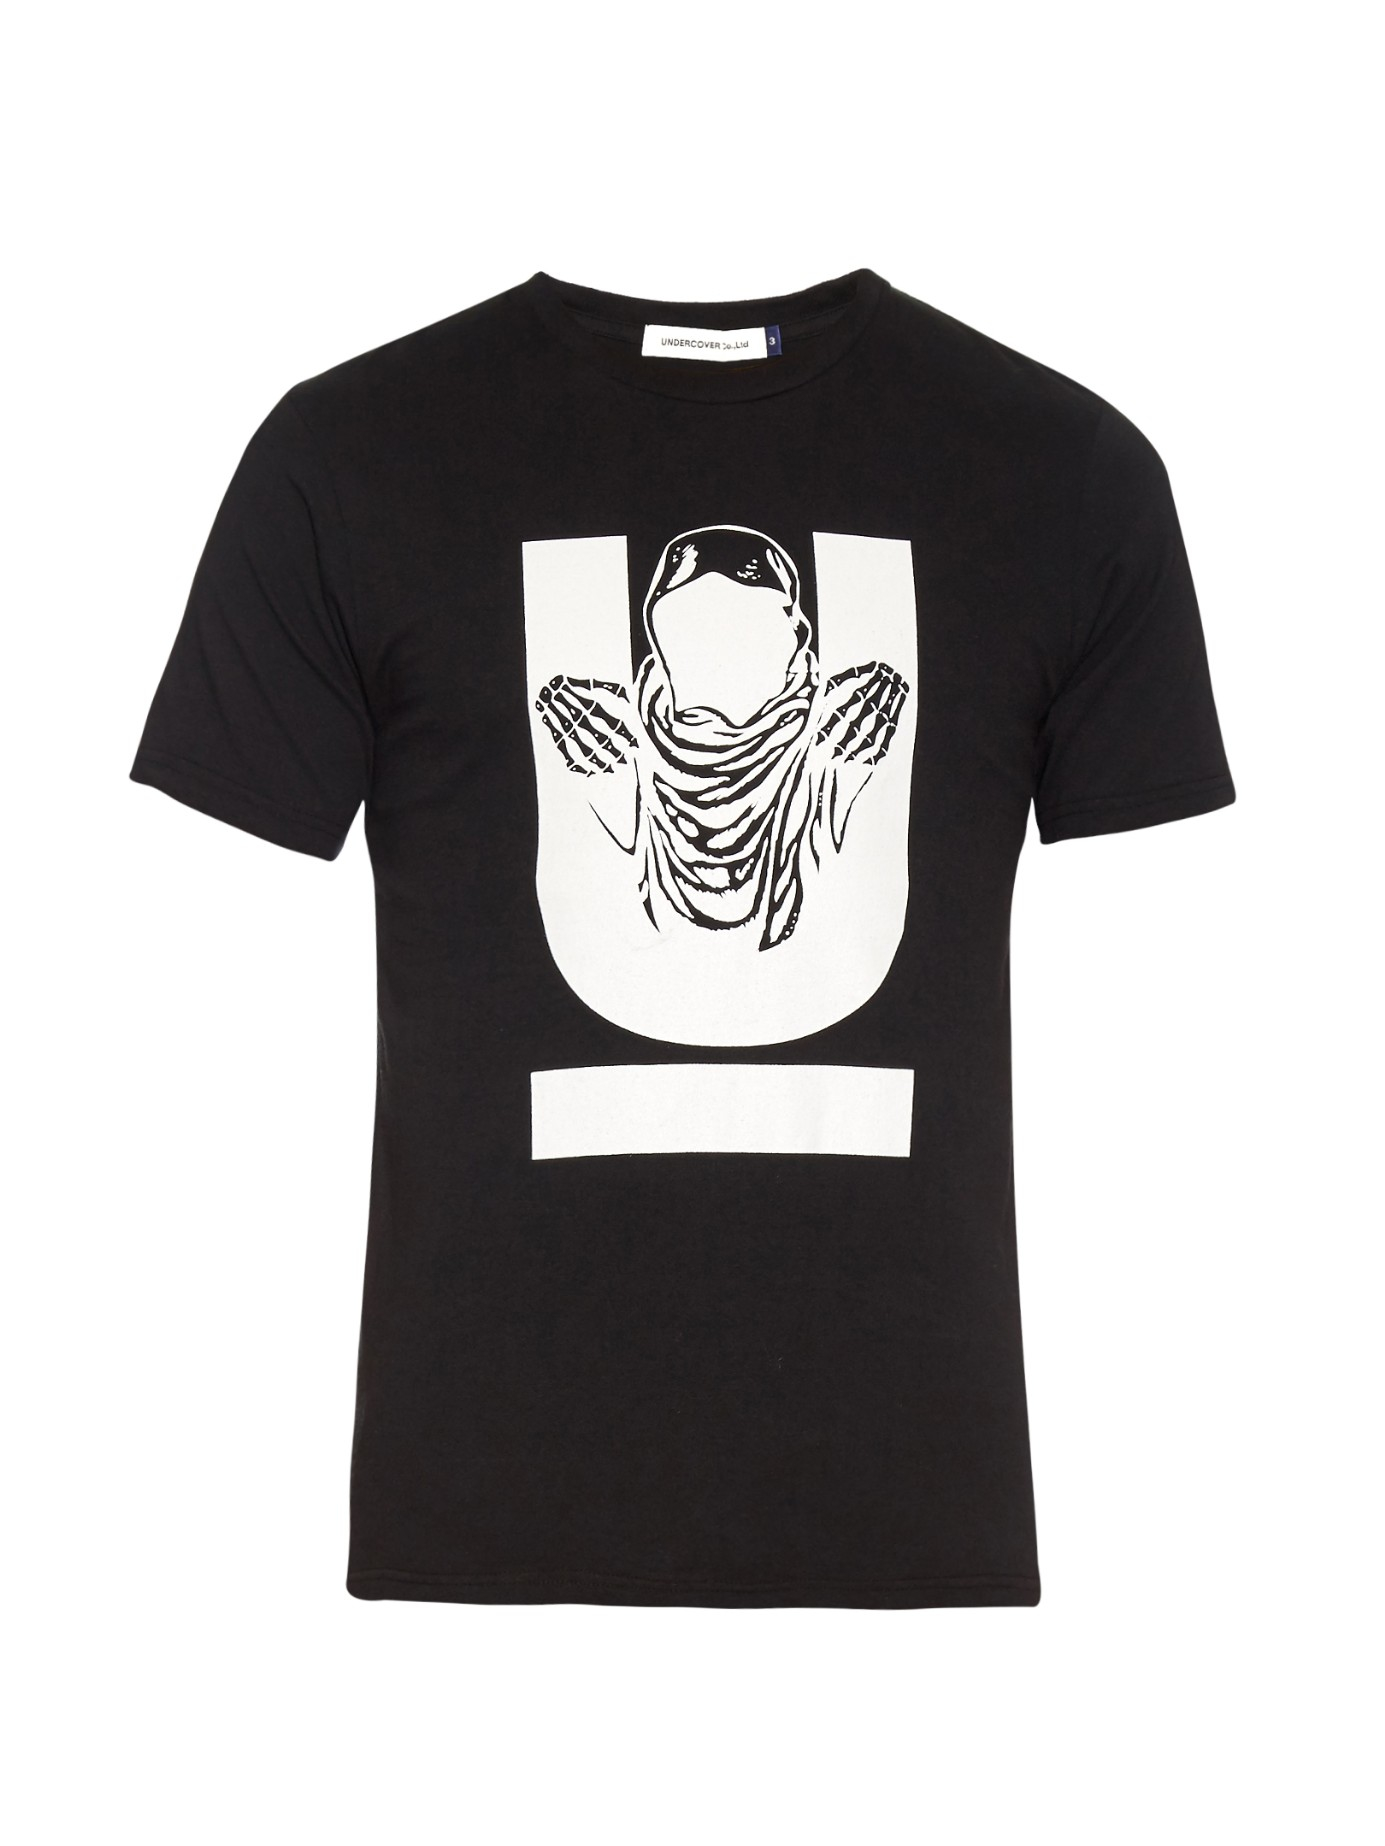 Lyst - Undercover U-print Cotton-jersey T-shirt in Black for Men